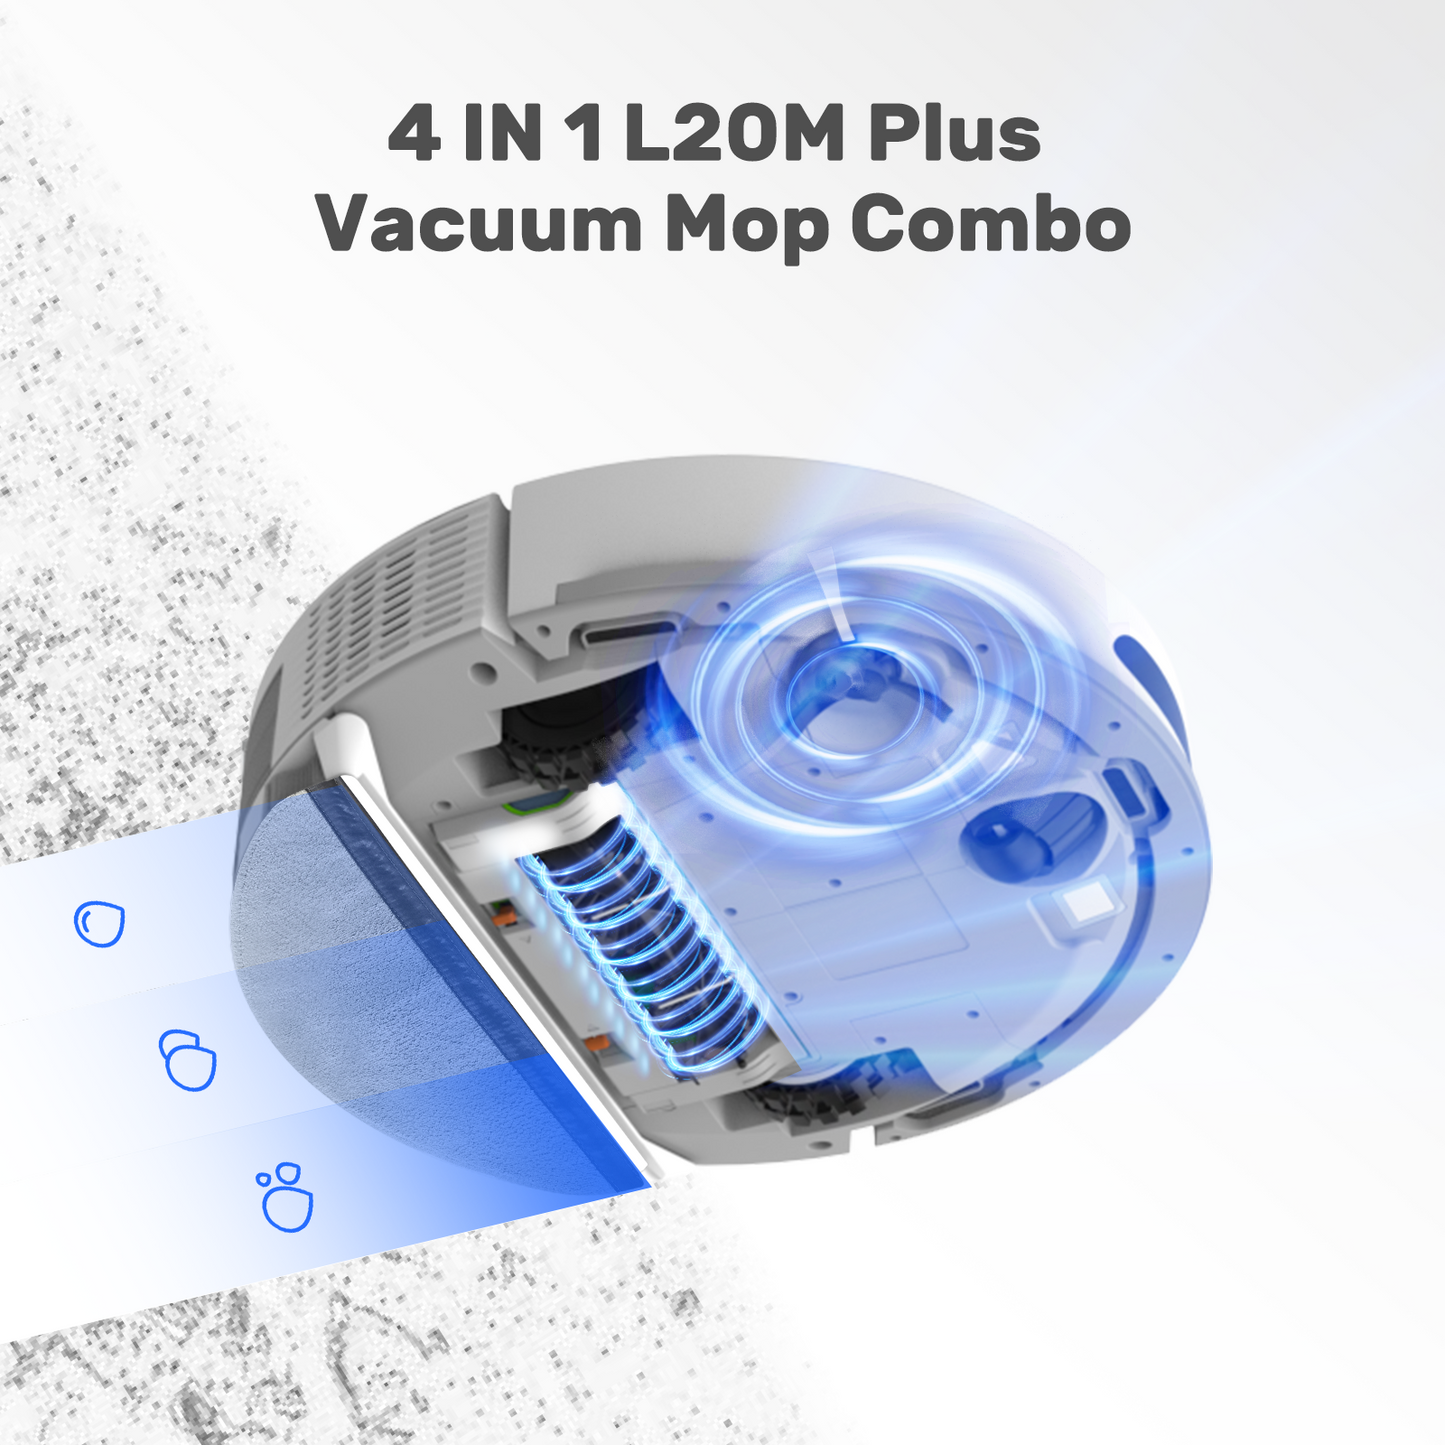 Verefa L20M Plus Self Emptying Robot Vacuum Cleaner and Mop Combo